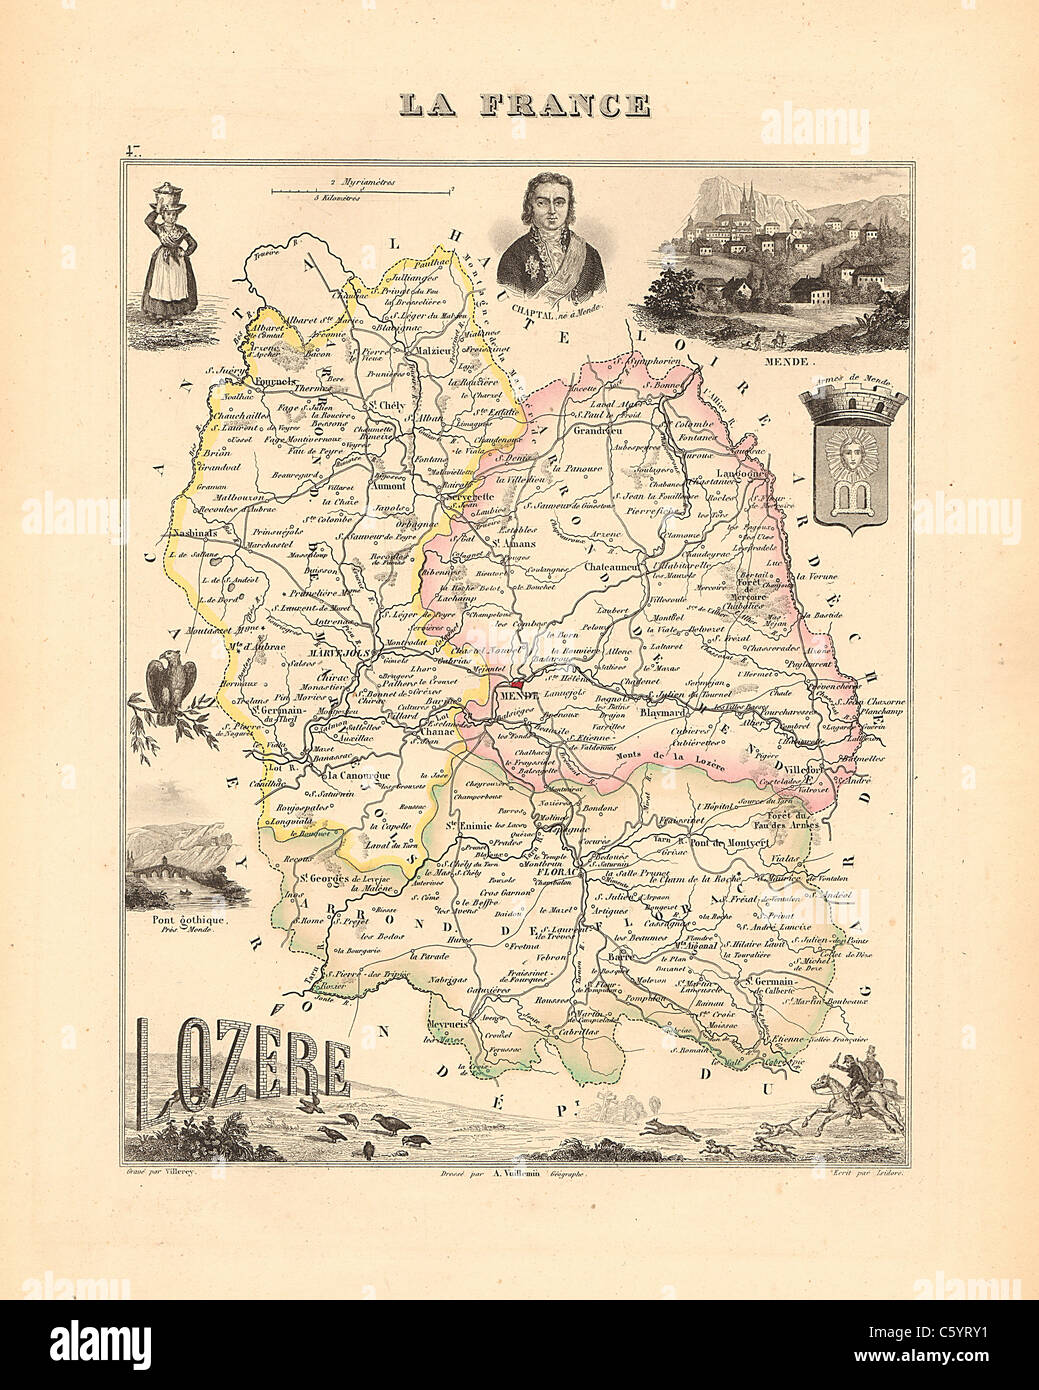 Lozere Department -  Antiquarian Map from an 1858 French Atlas 'France and its Colonies' (La France et ses Colonies ) by Alexandre Vuillemin Stock Photo